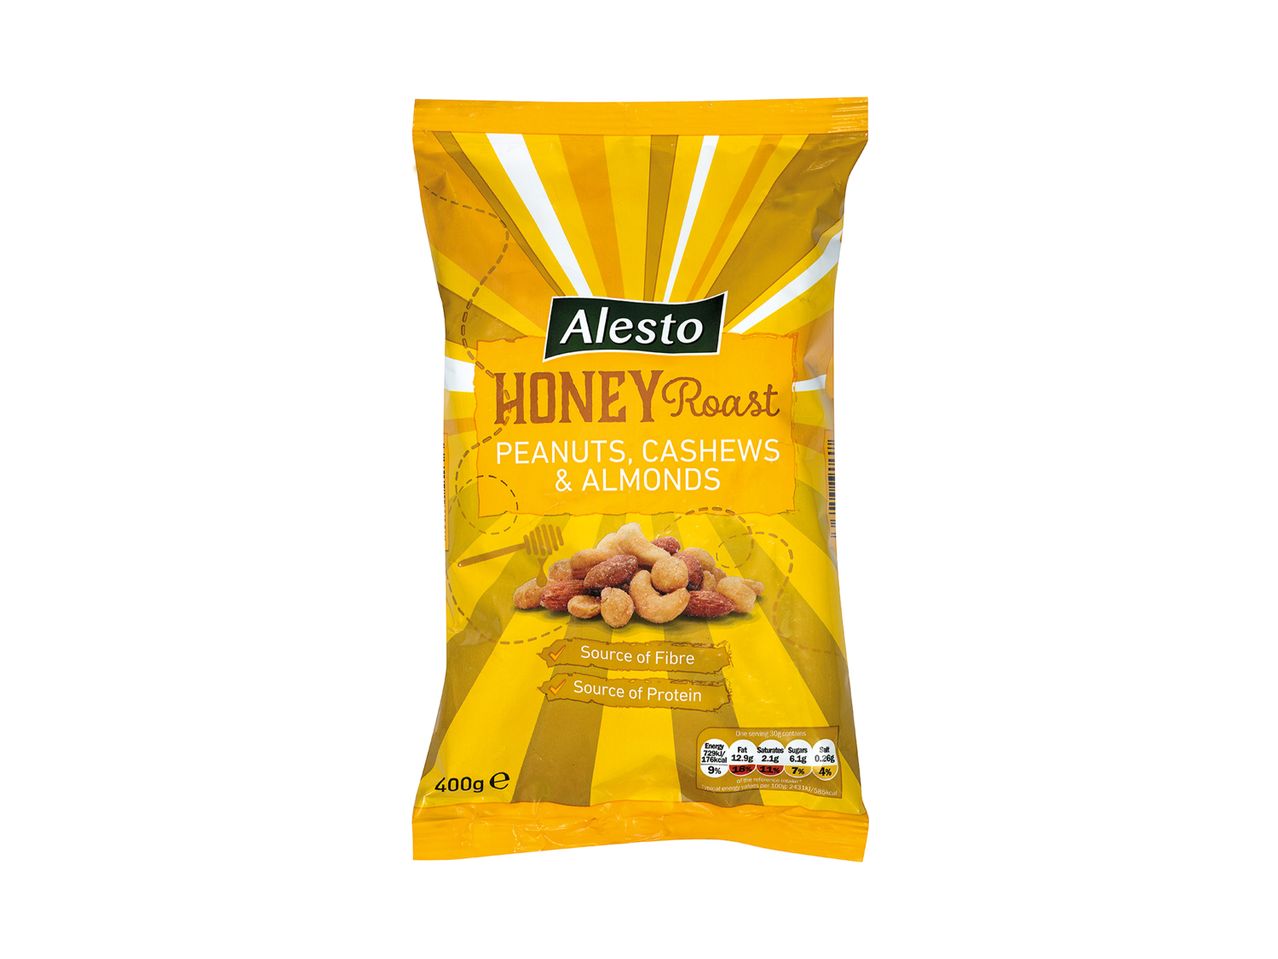 Go to full screen view: Alesto Spiced Nuts - Image 1